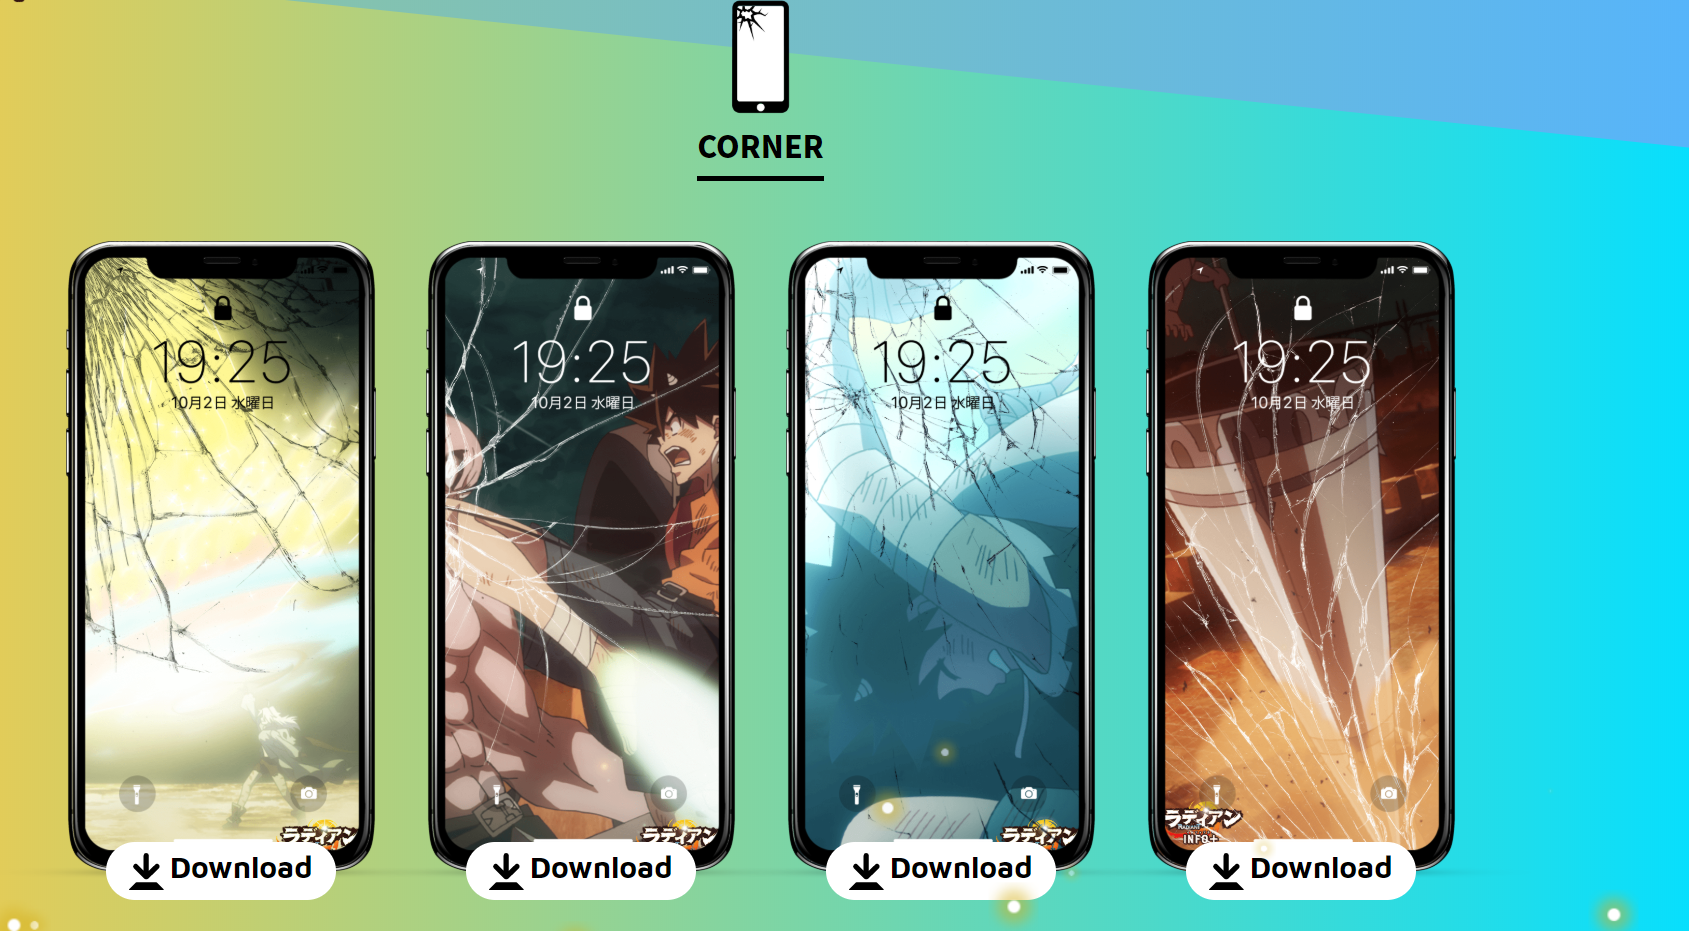 French-Japanese anime has ingenius PR idea: wallpapers for your phone ...